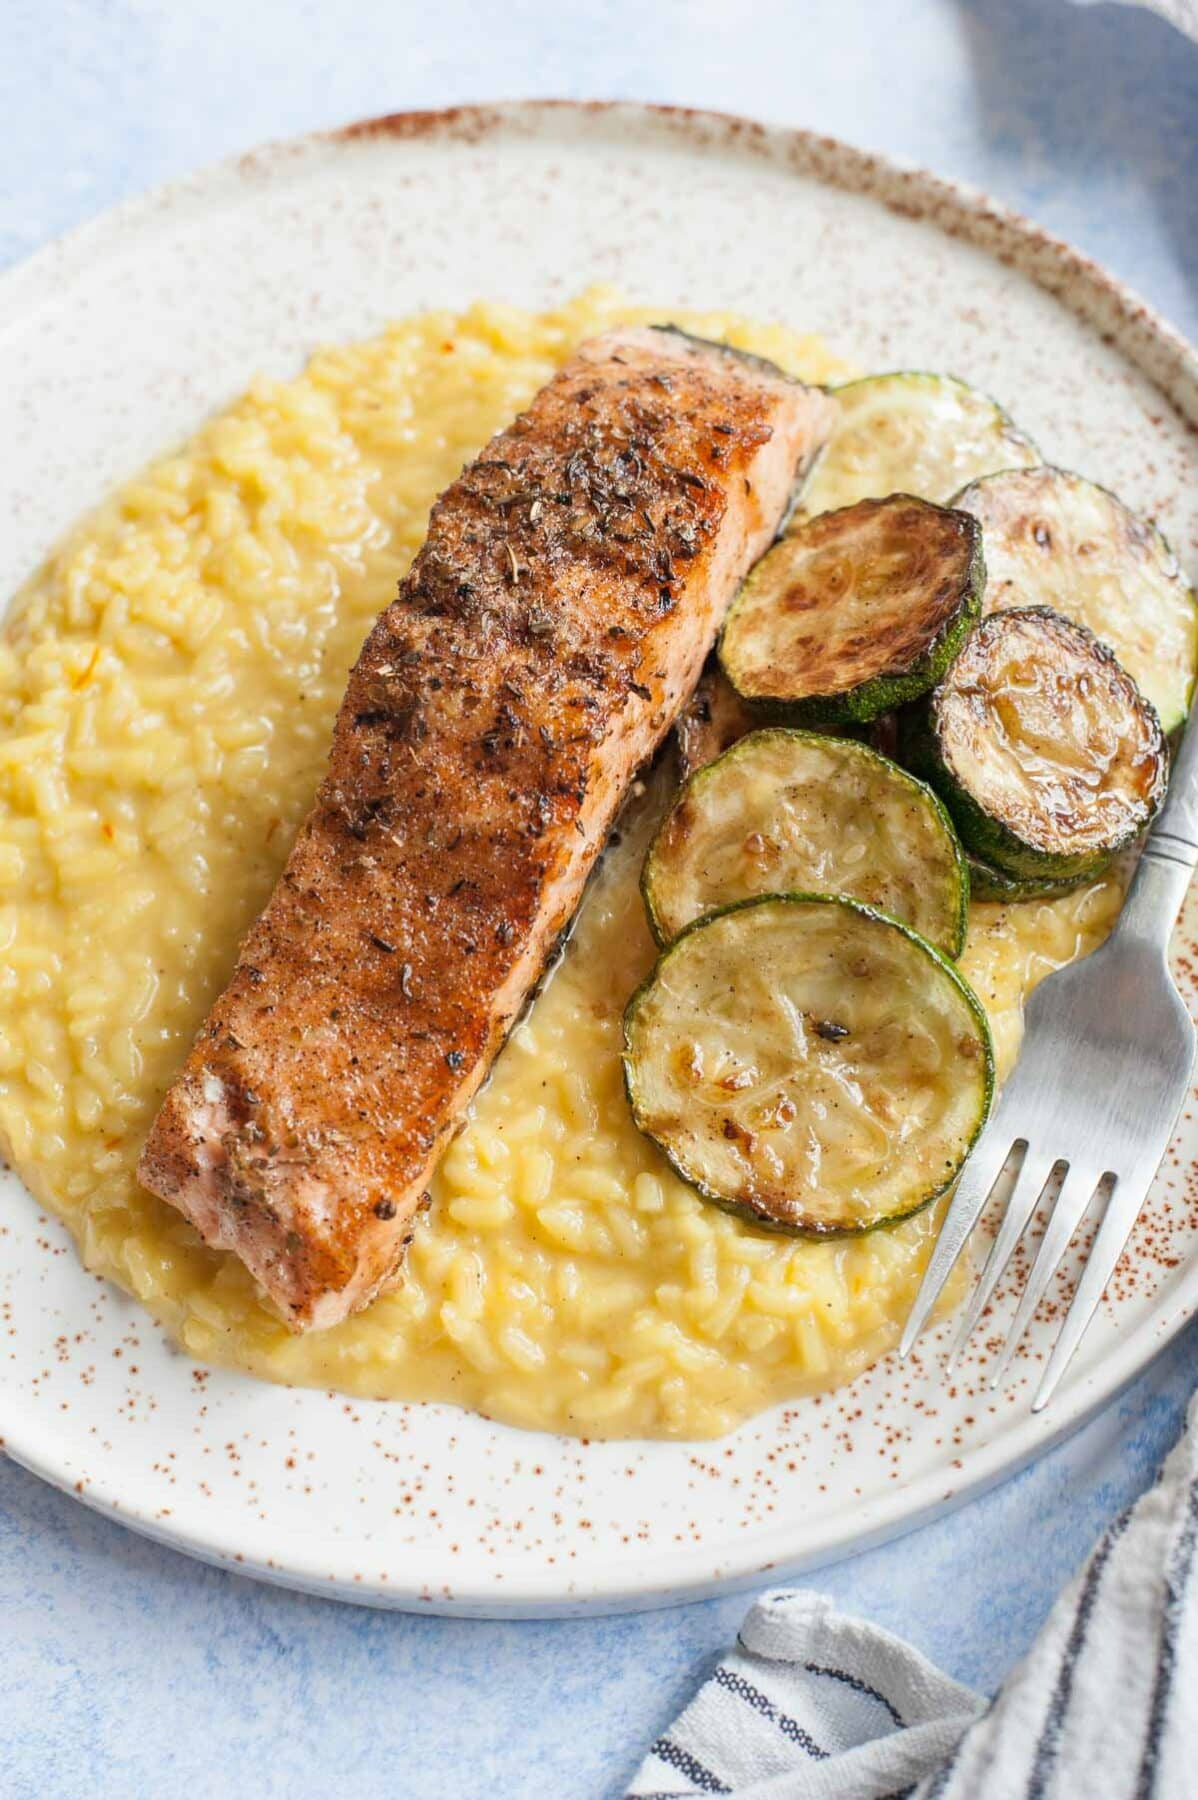 Saffron risotto with grilled salmon and zucchini on a white plate.